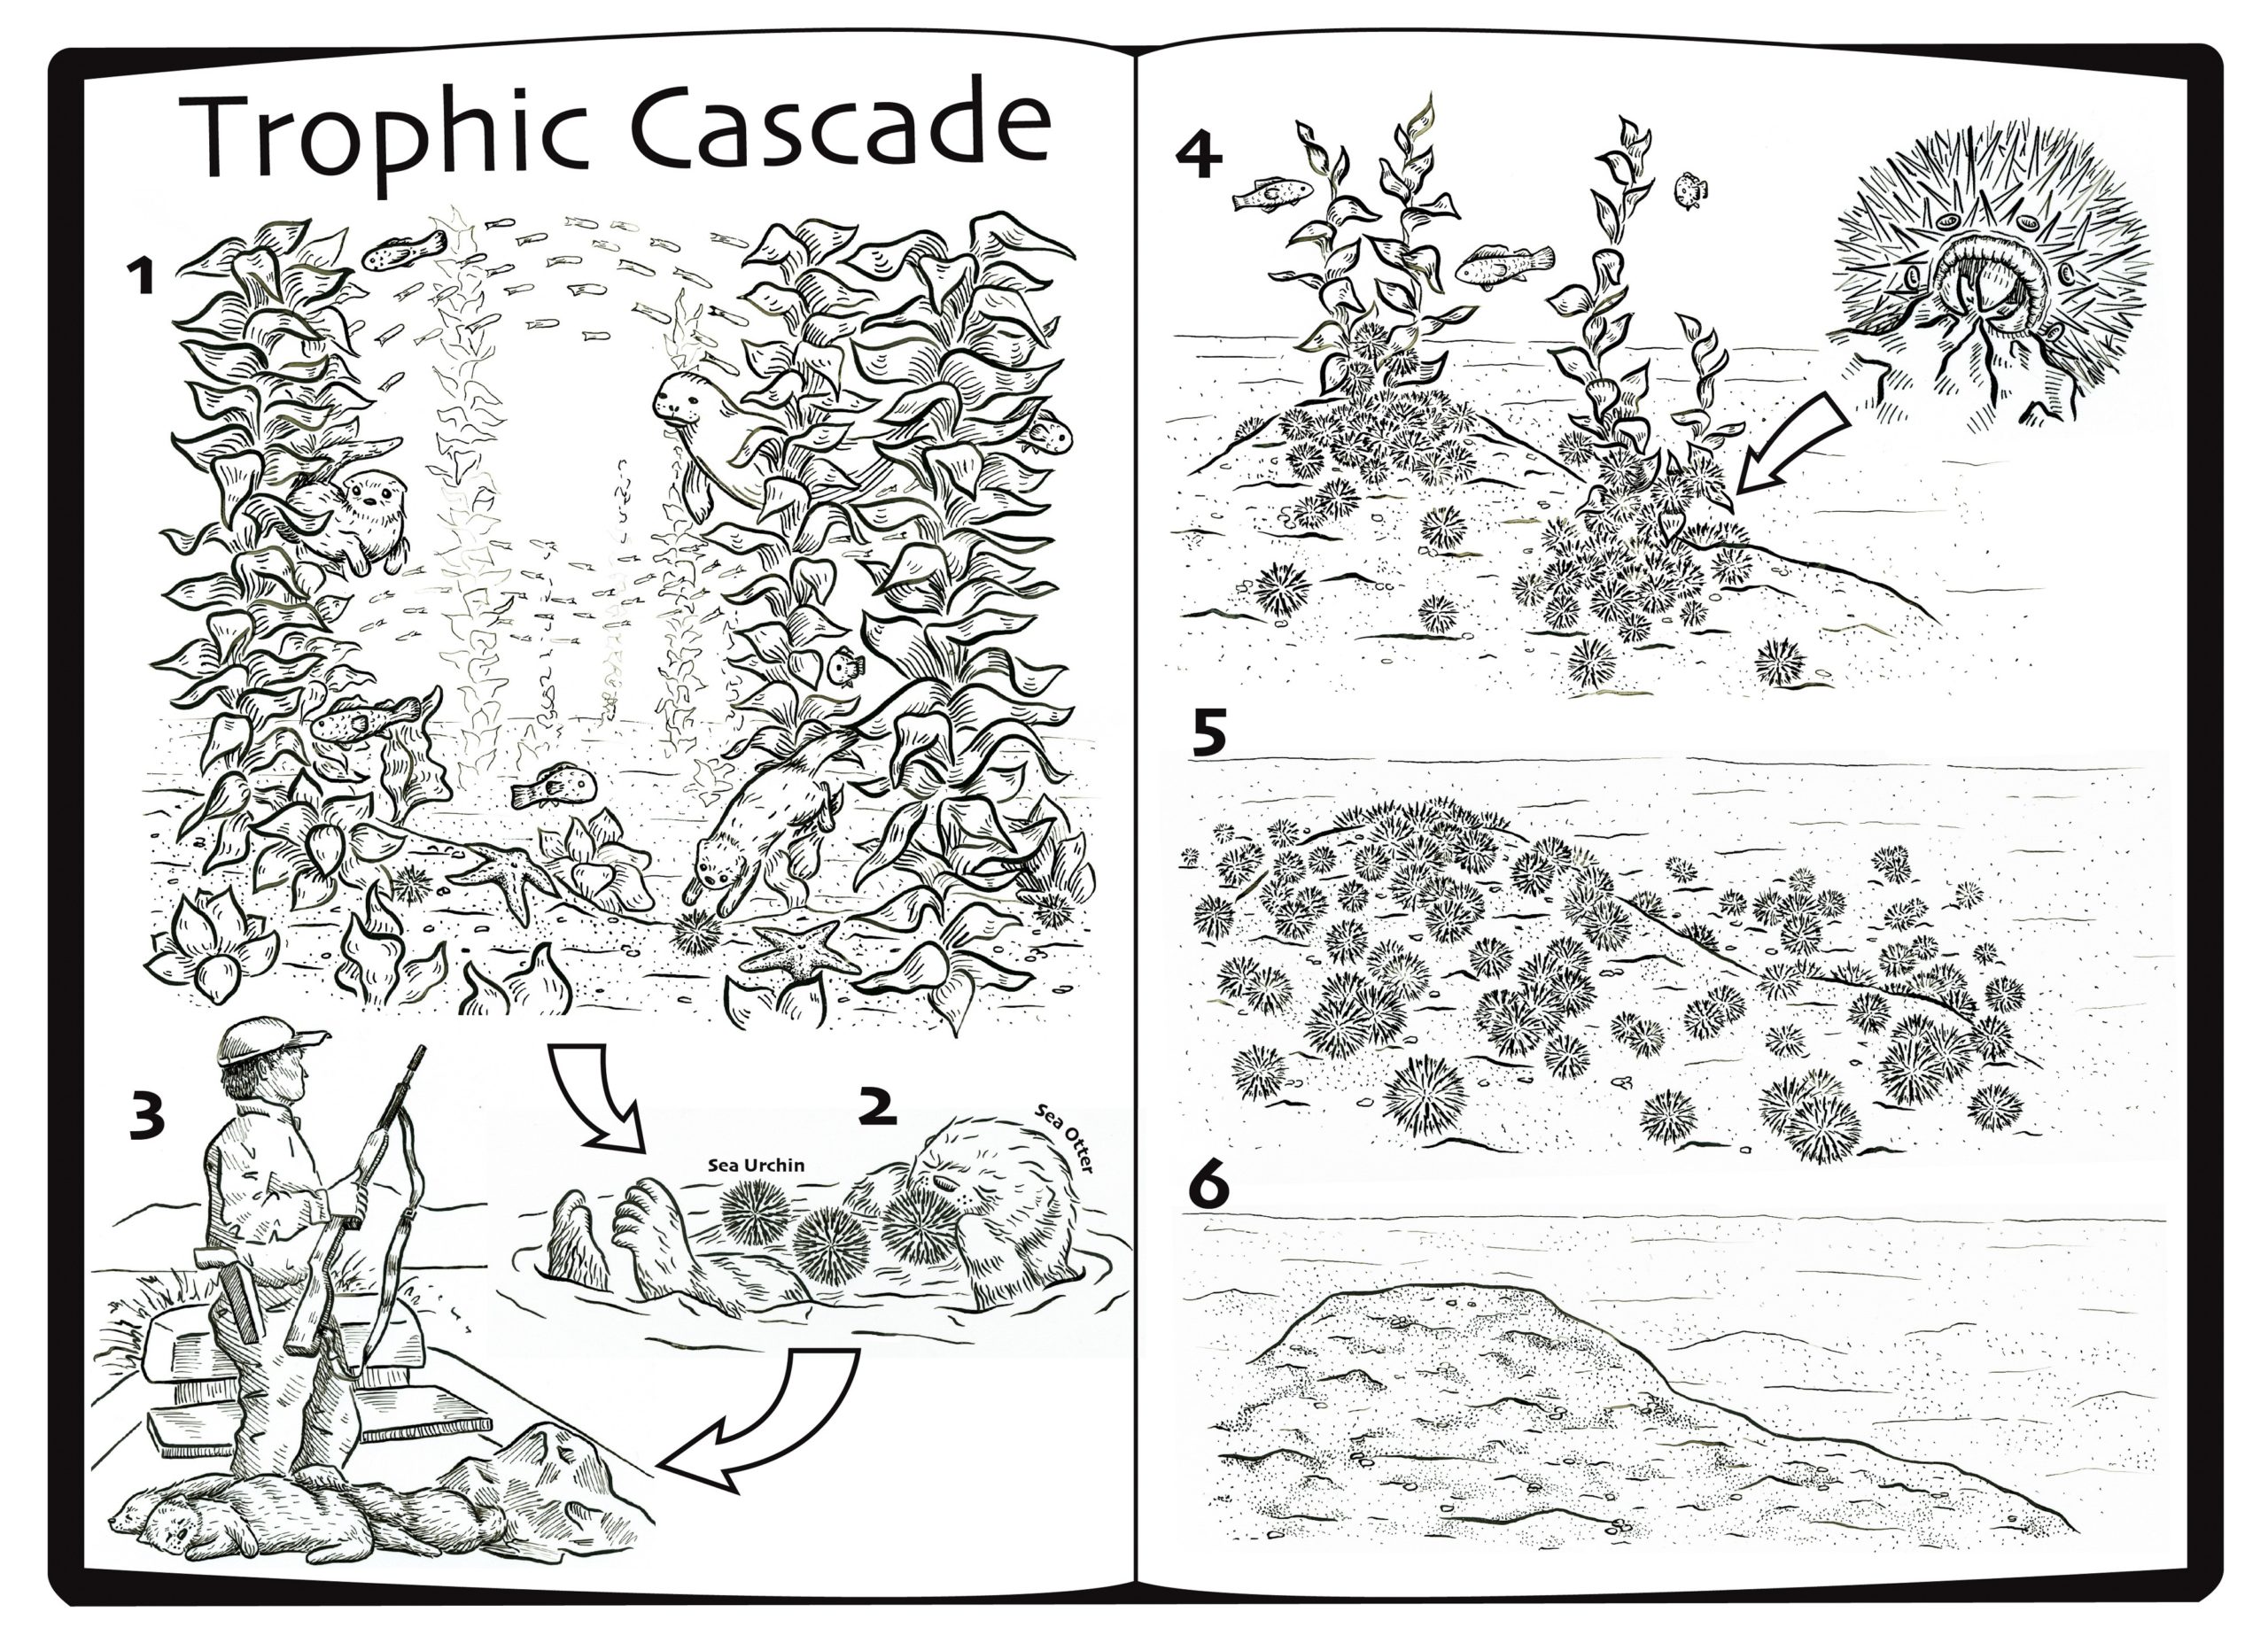 Keystone Species and Trophic Cascades - Science Lessons That Rock